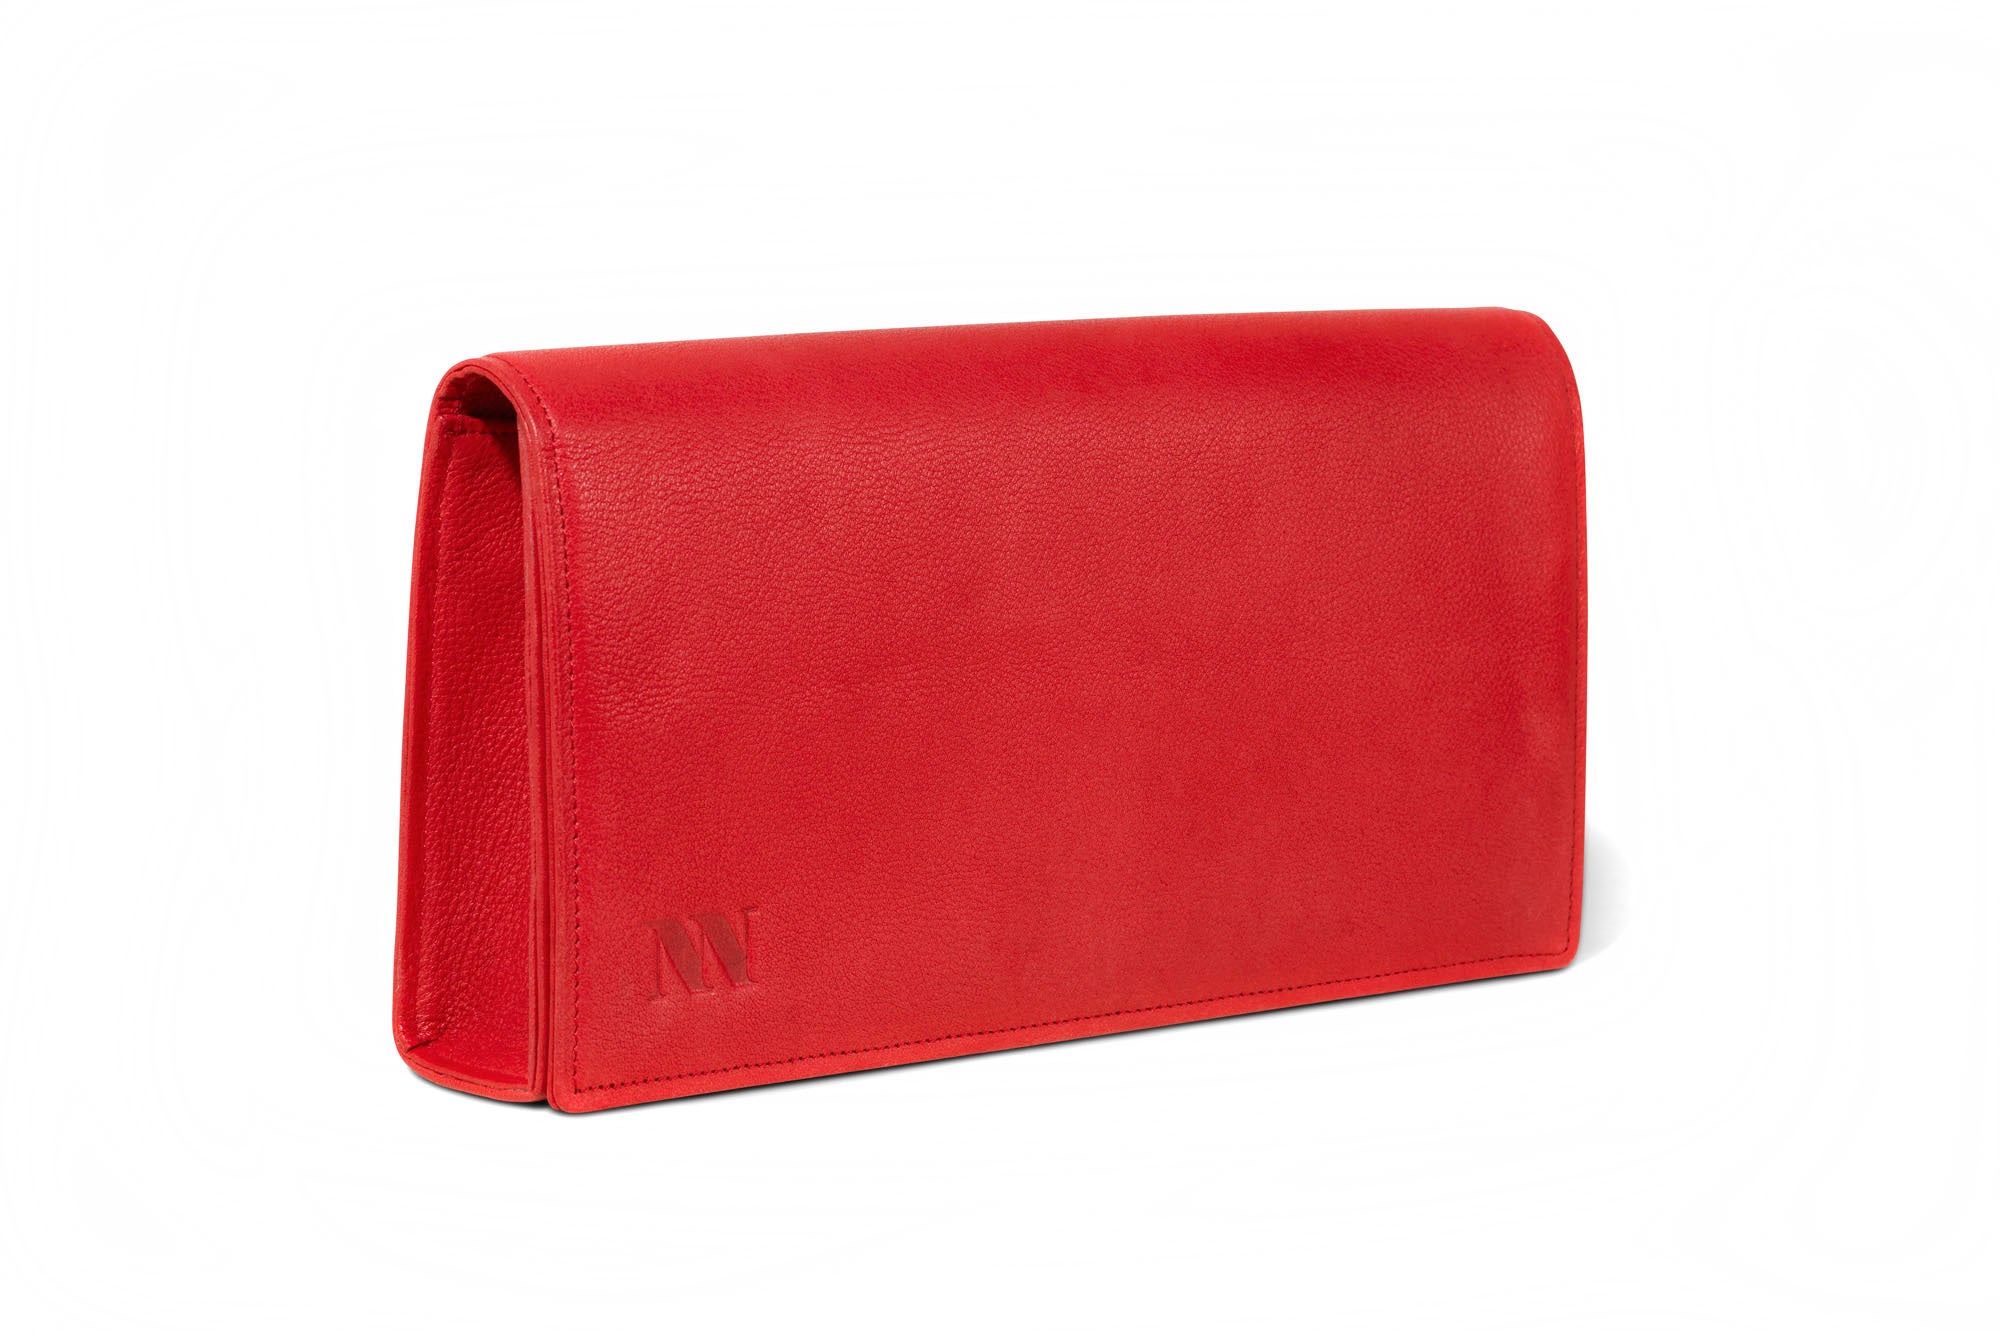 Infinite Large Clutch Scarlett Red – Natural Nuance